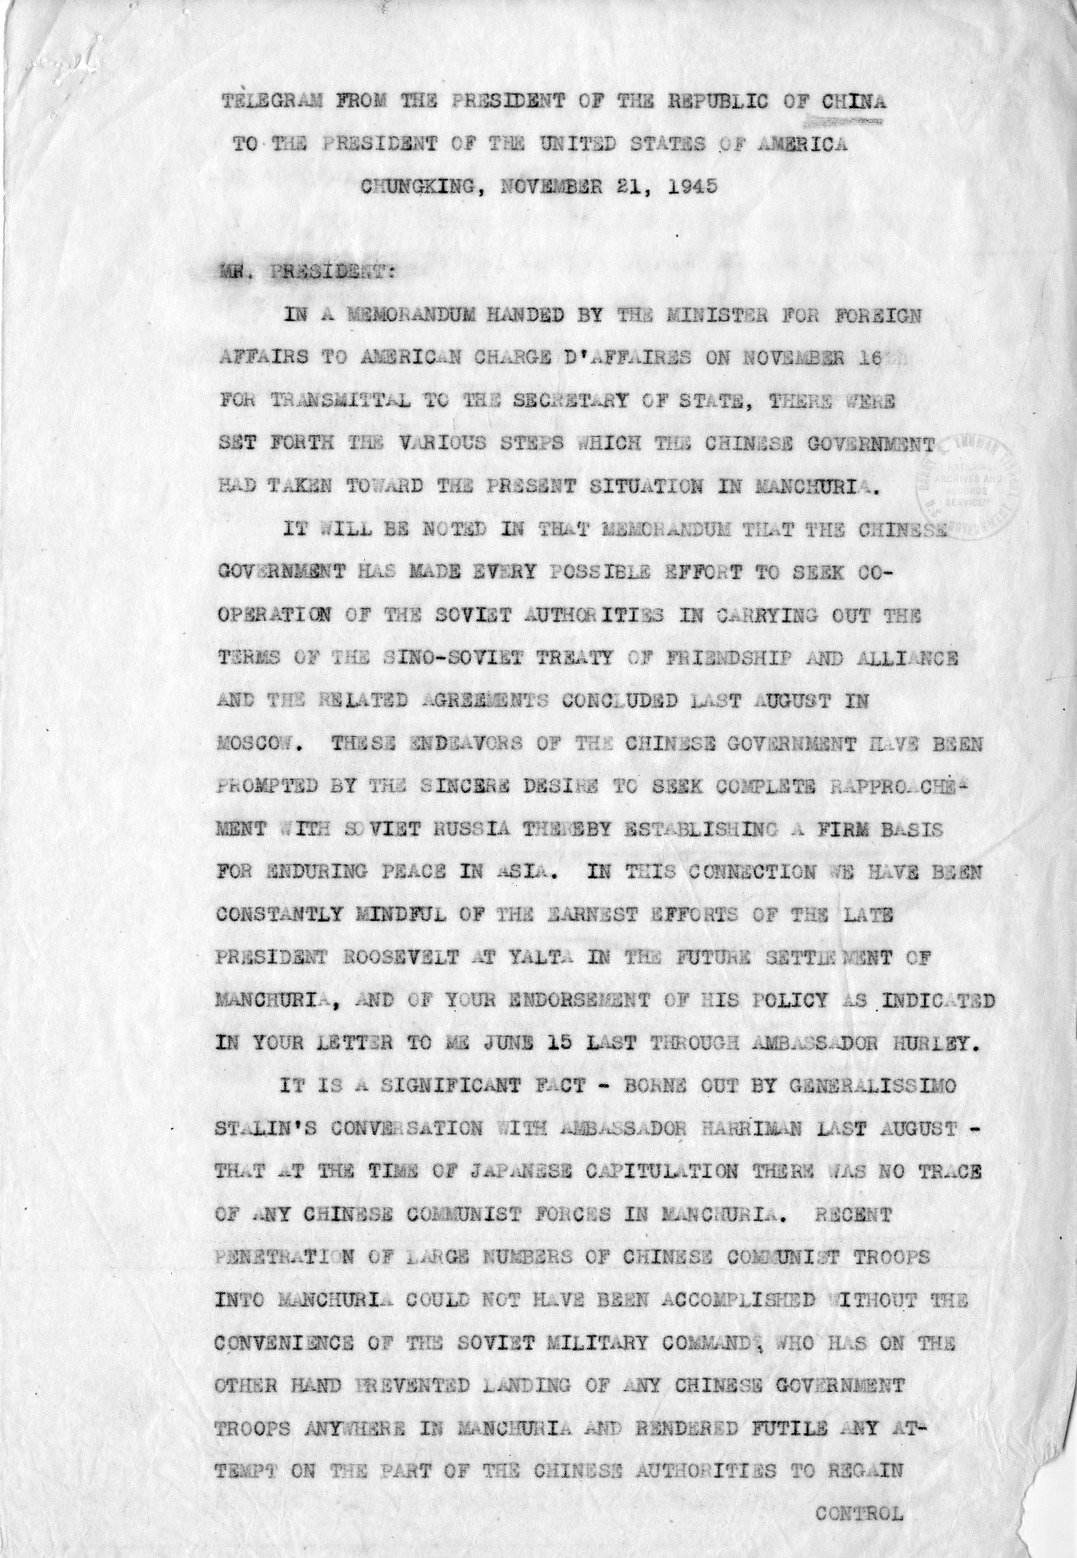 Memorandum from Secretary of State James F. Byrnes to President Harry S. Truman, with Attachment